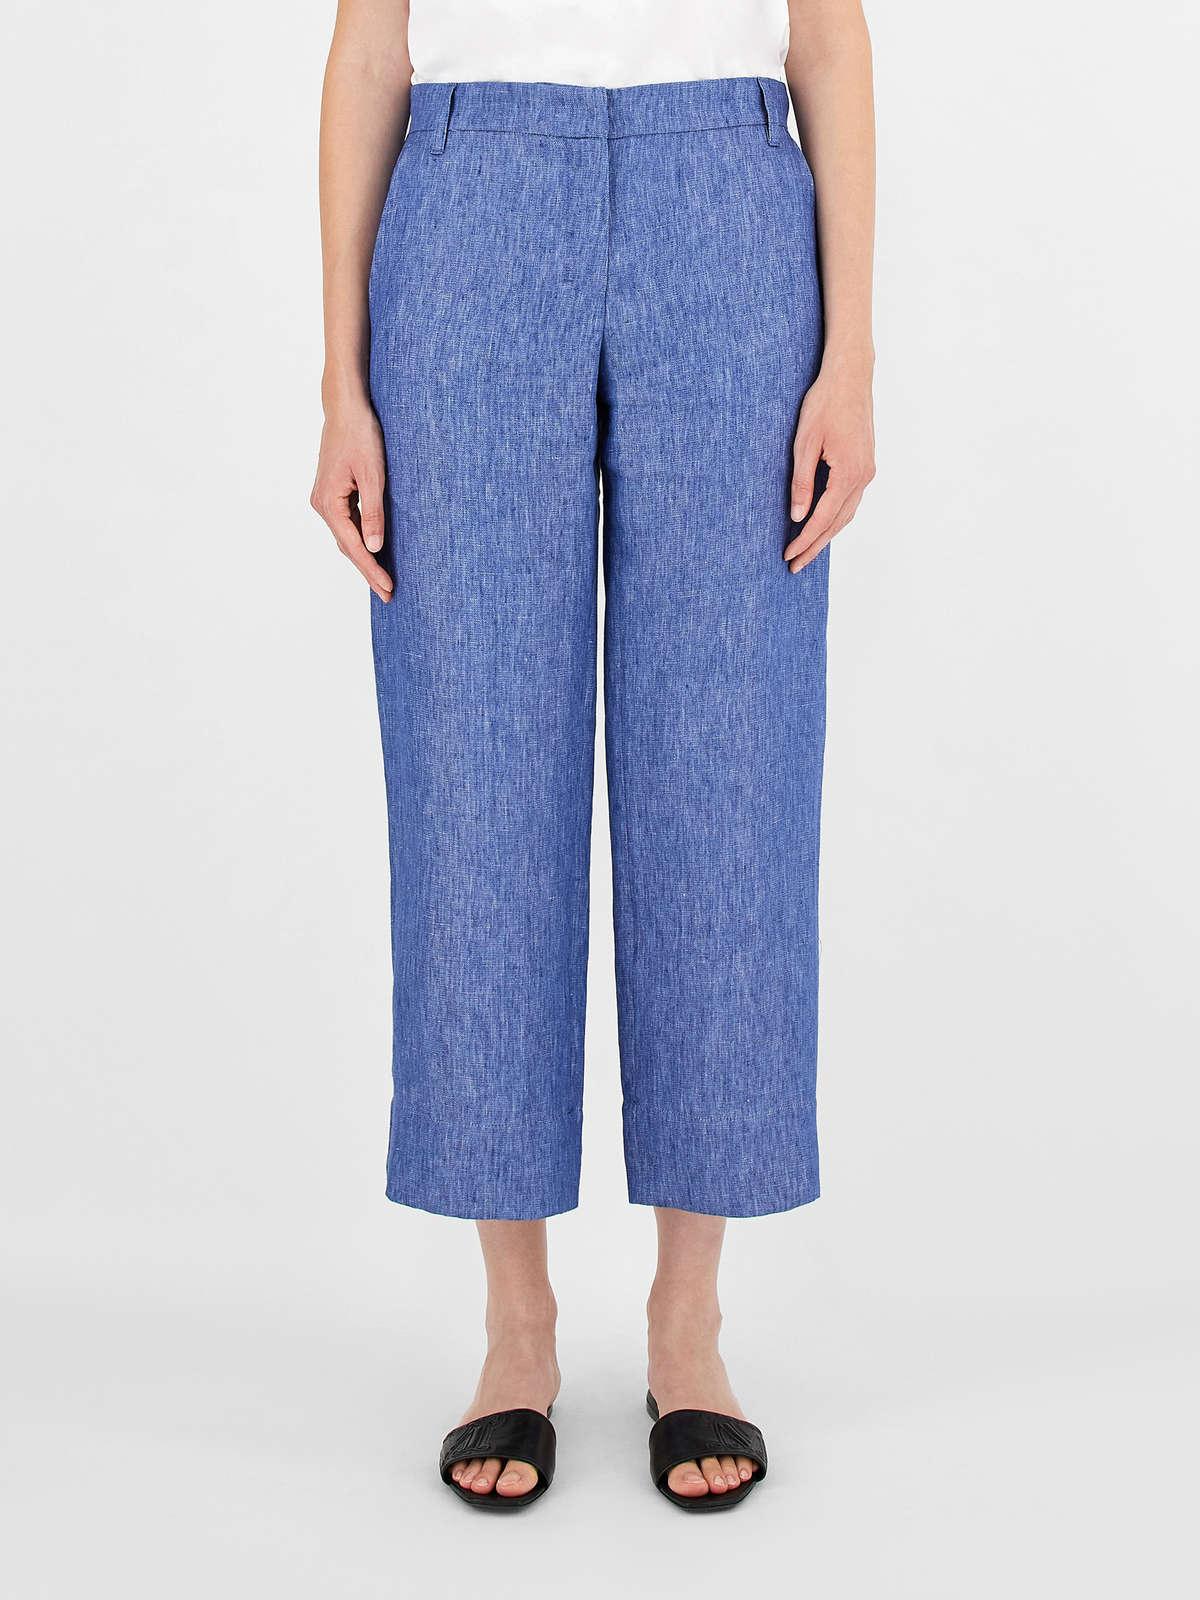 Womens Max Mara Trousers And Jeans | Faded-Look Linen Trousers Cornflower Blue